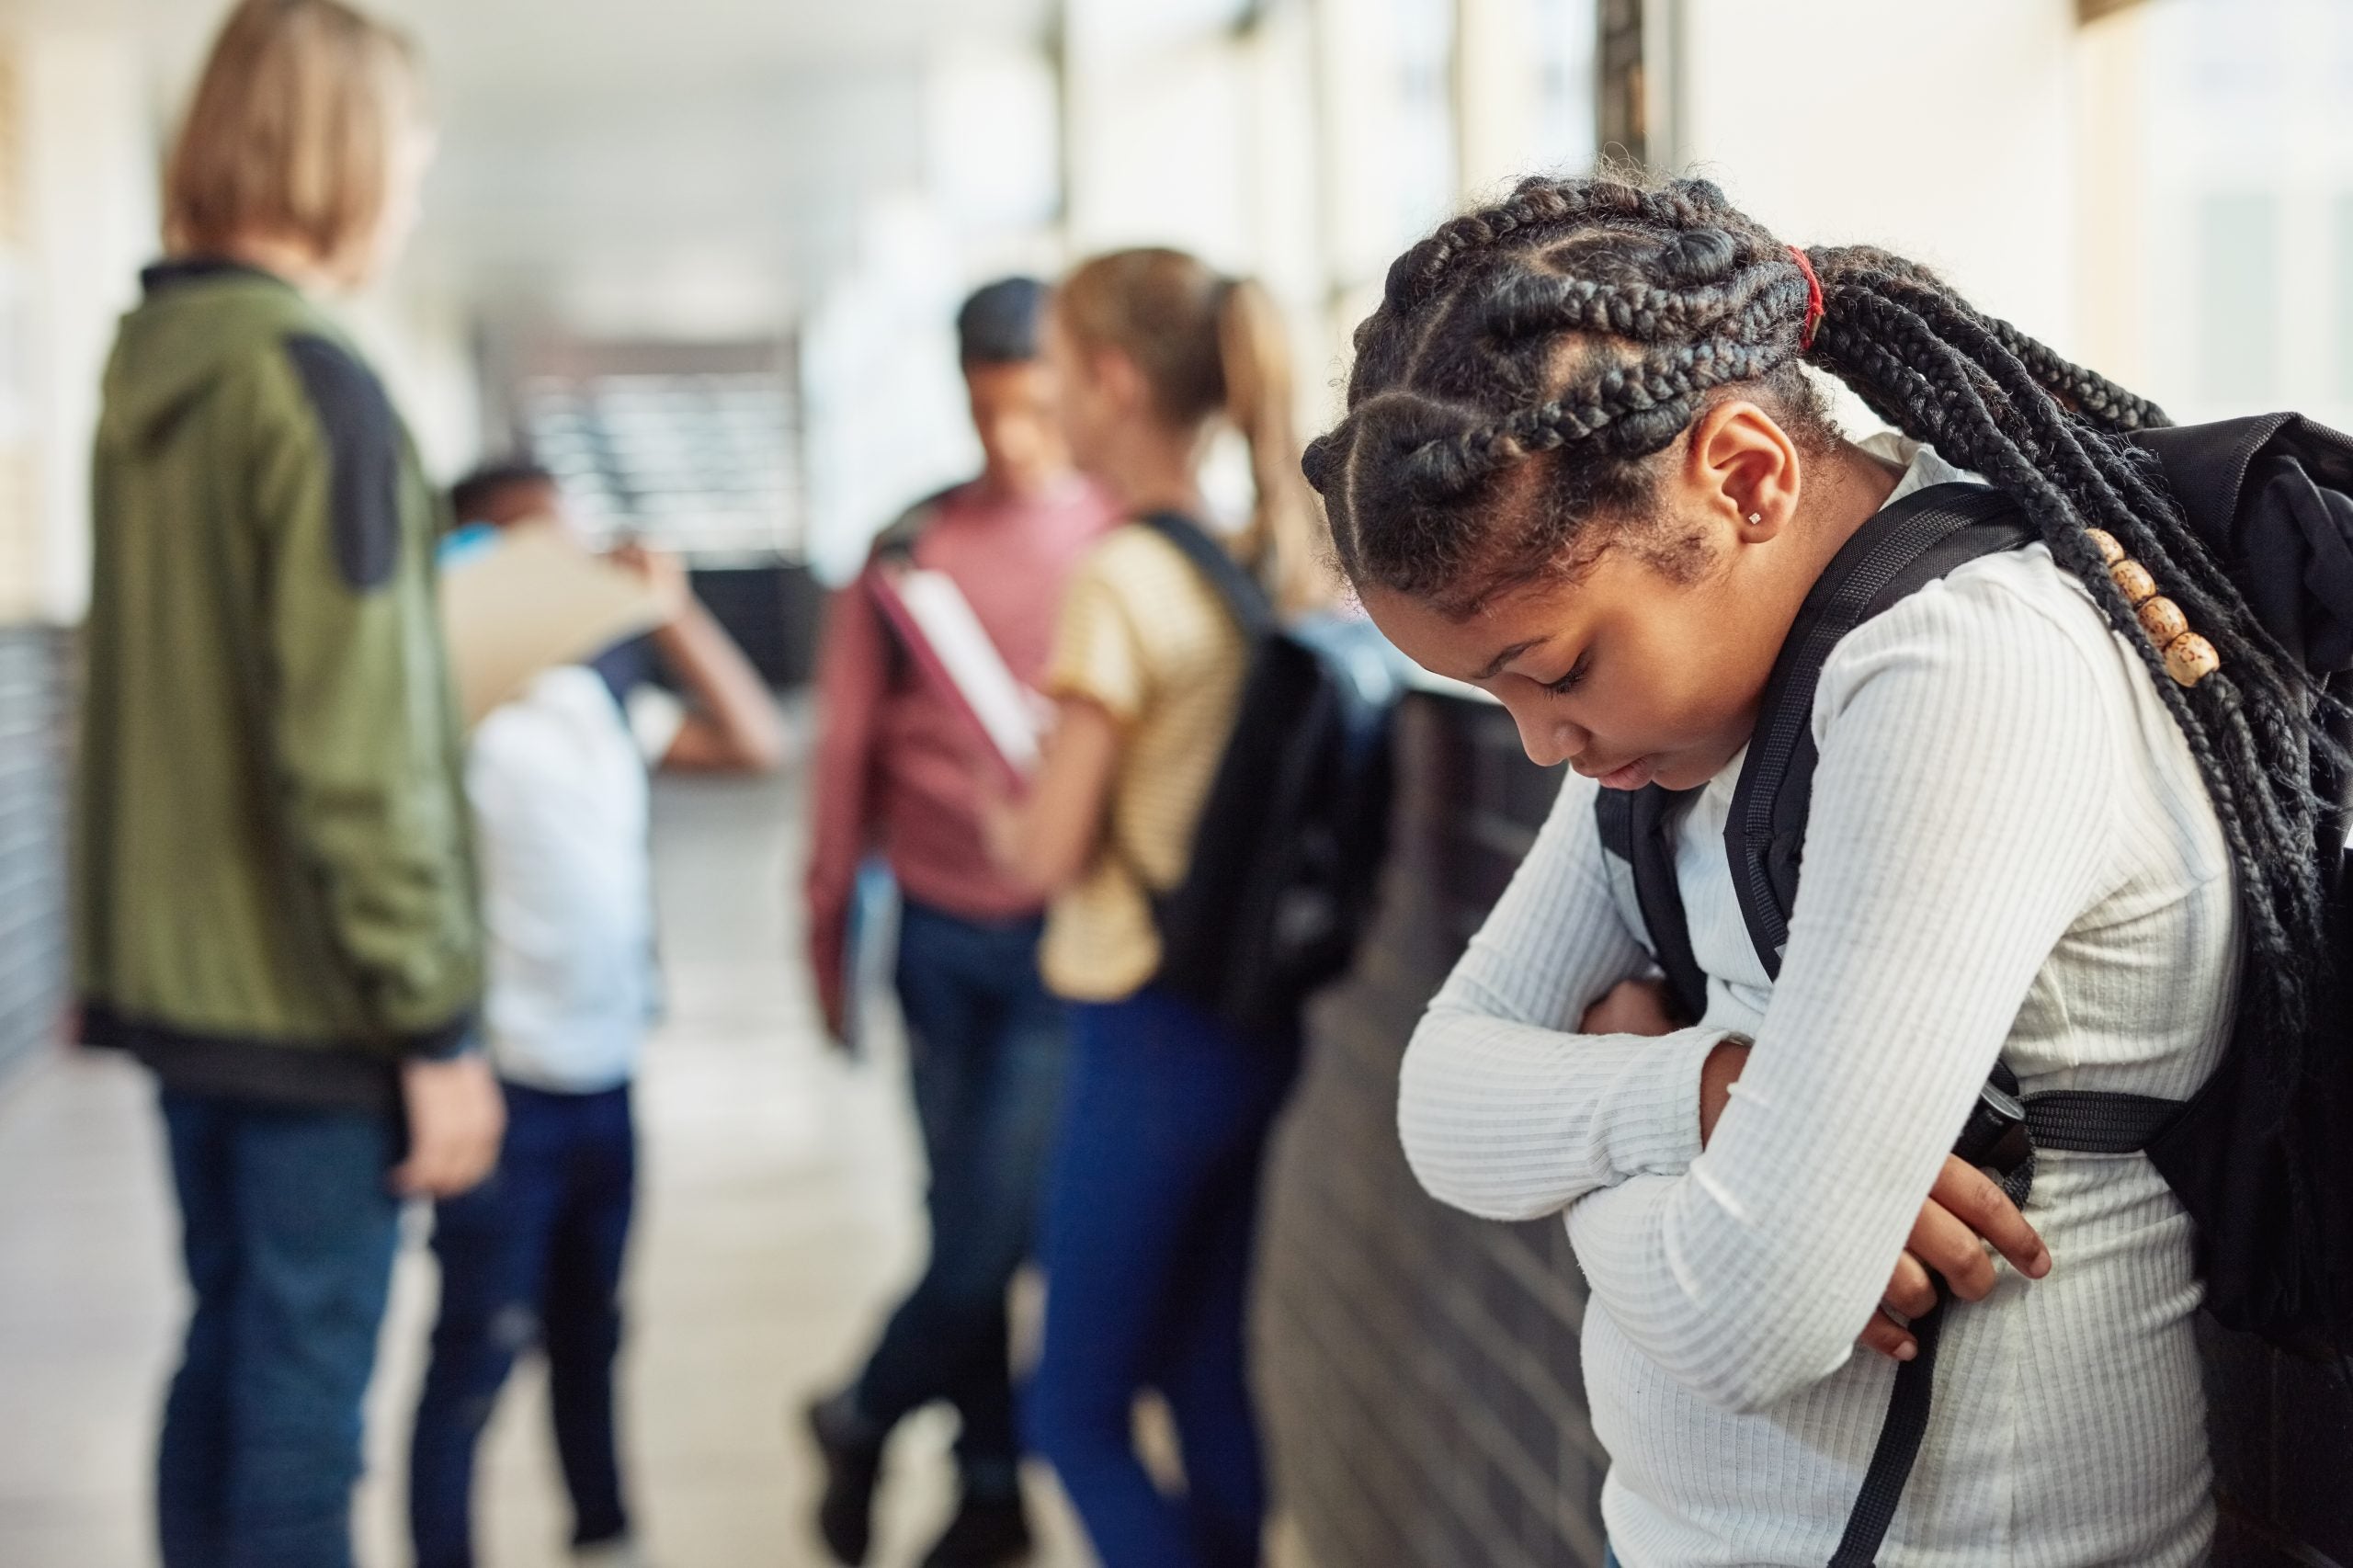 A Report Into Black Utah Student’s Suicide Reveals The School Allowed Bullying To Go Unchecked